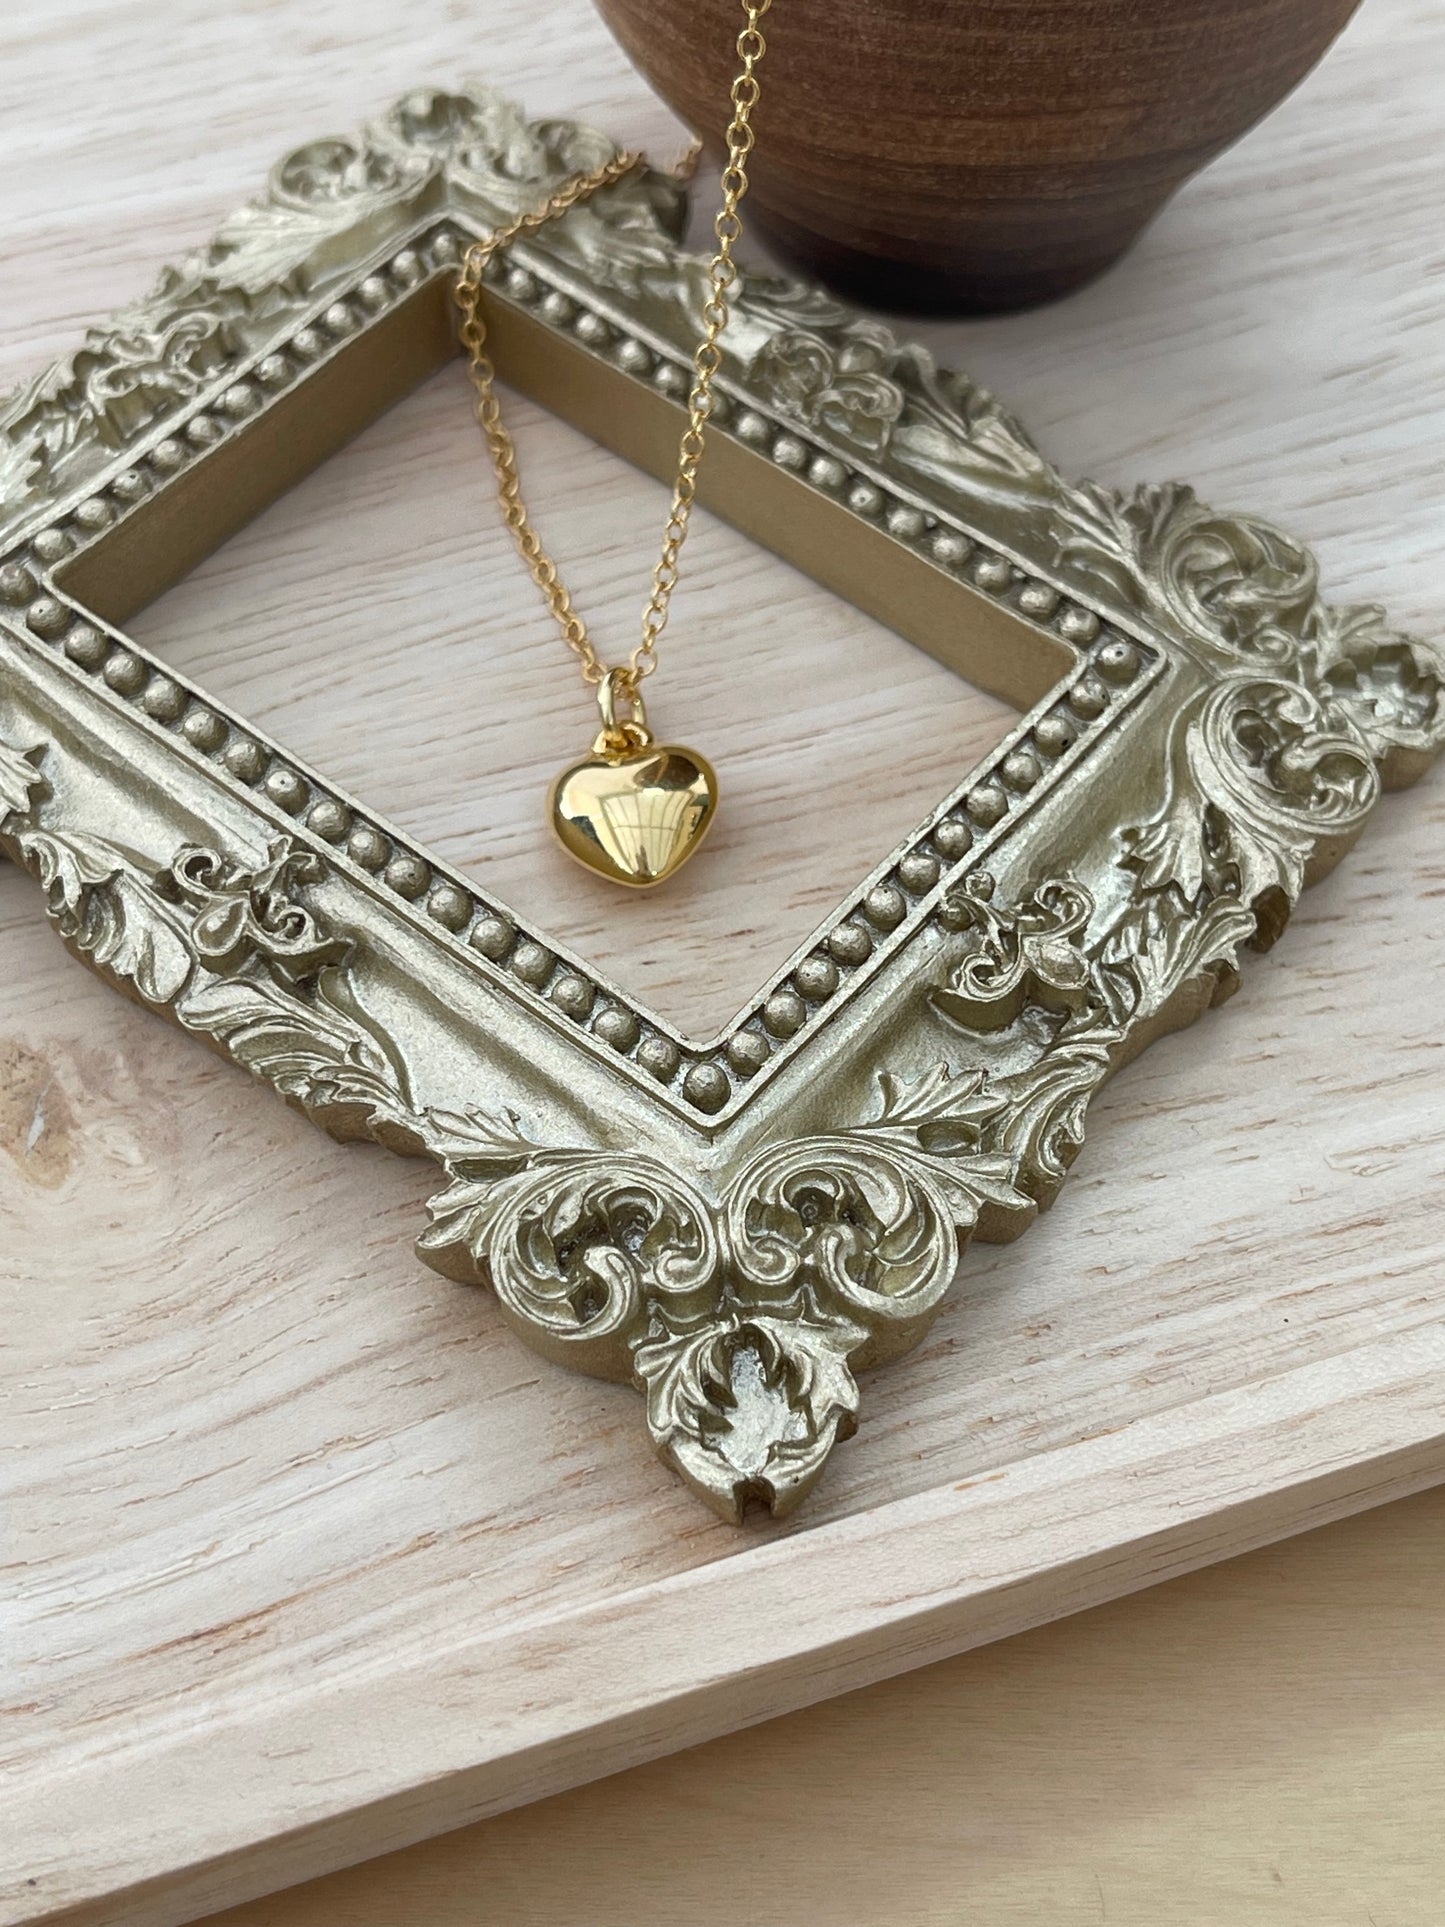 Gold puffed Heart Pendant Dainty Necklace